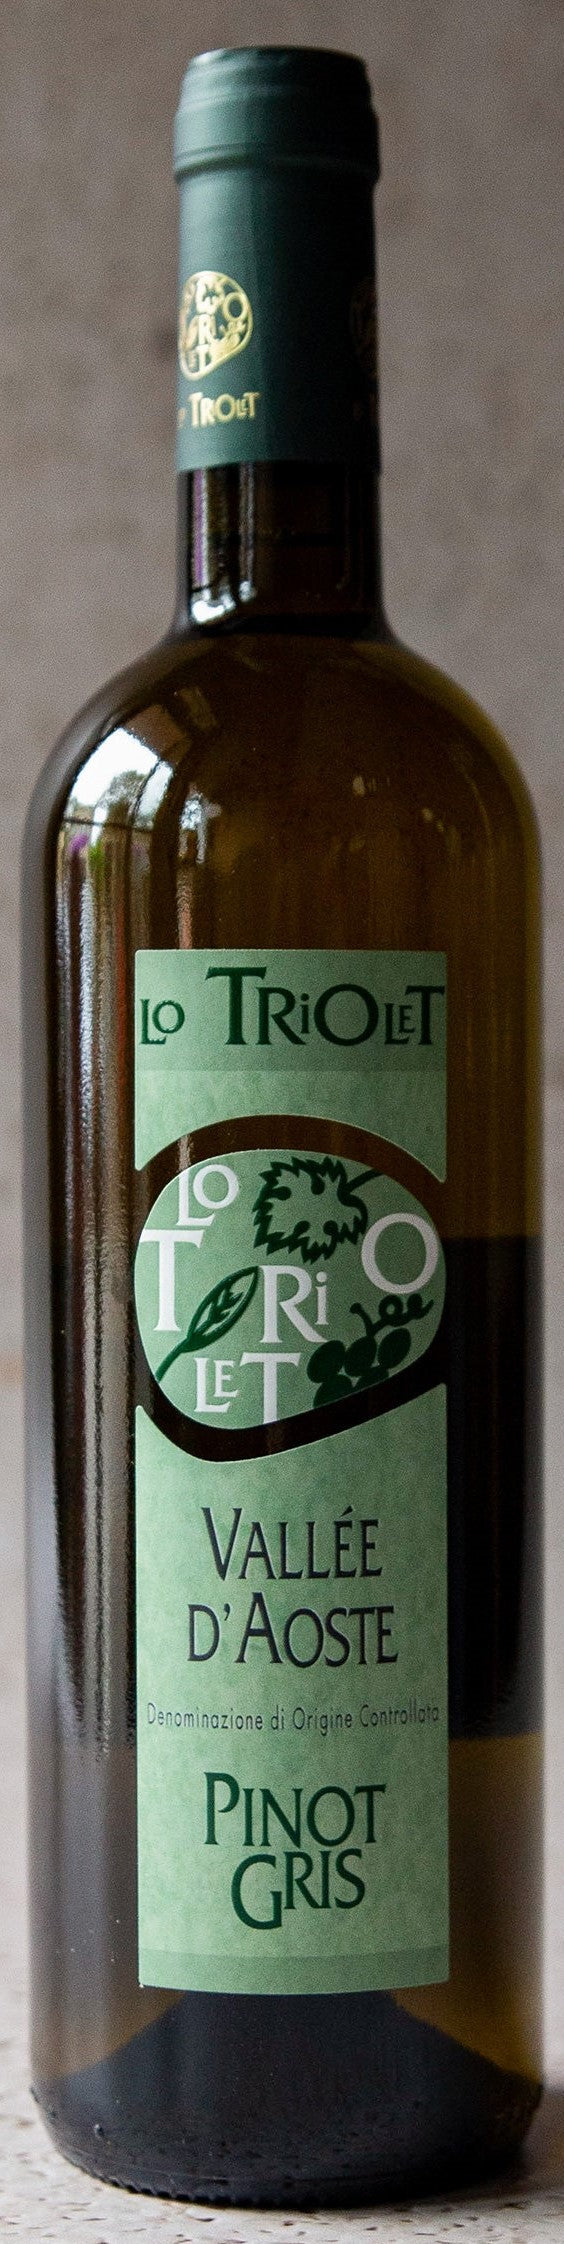 Pinot Gris Vallee d'Aoste, Lo Triolet 2020